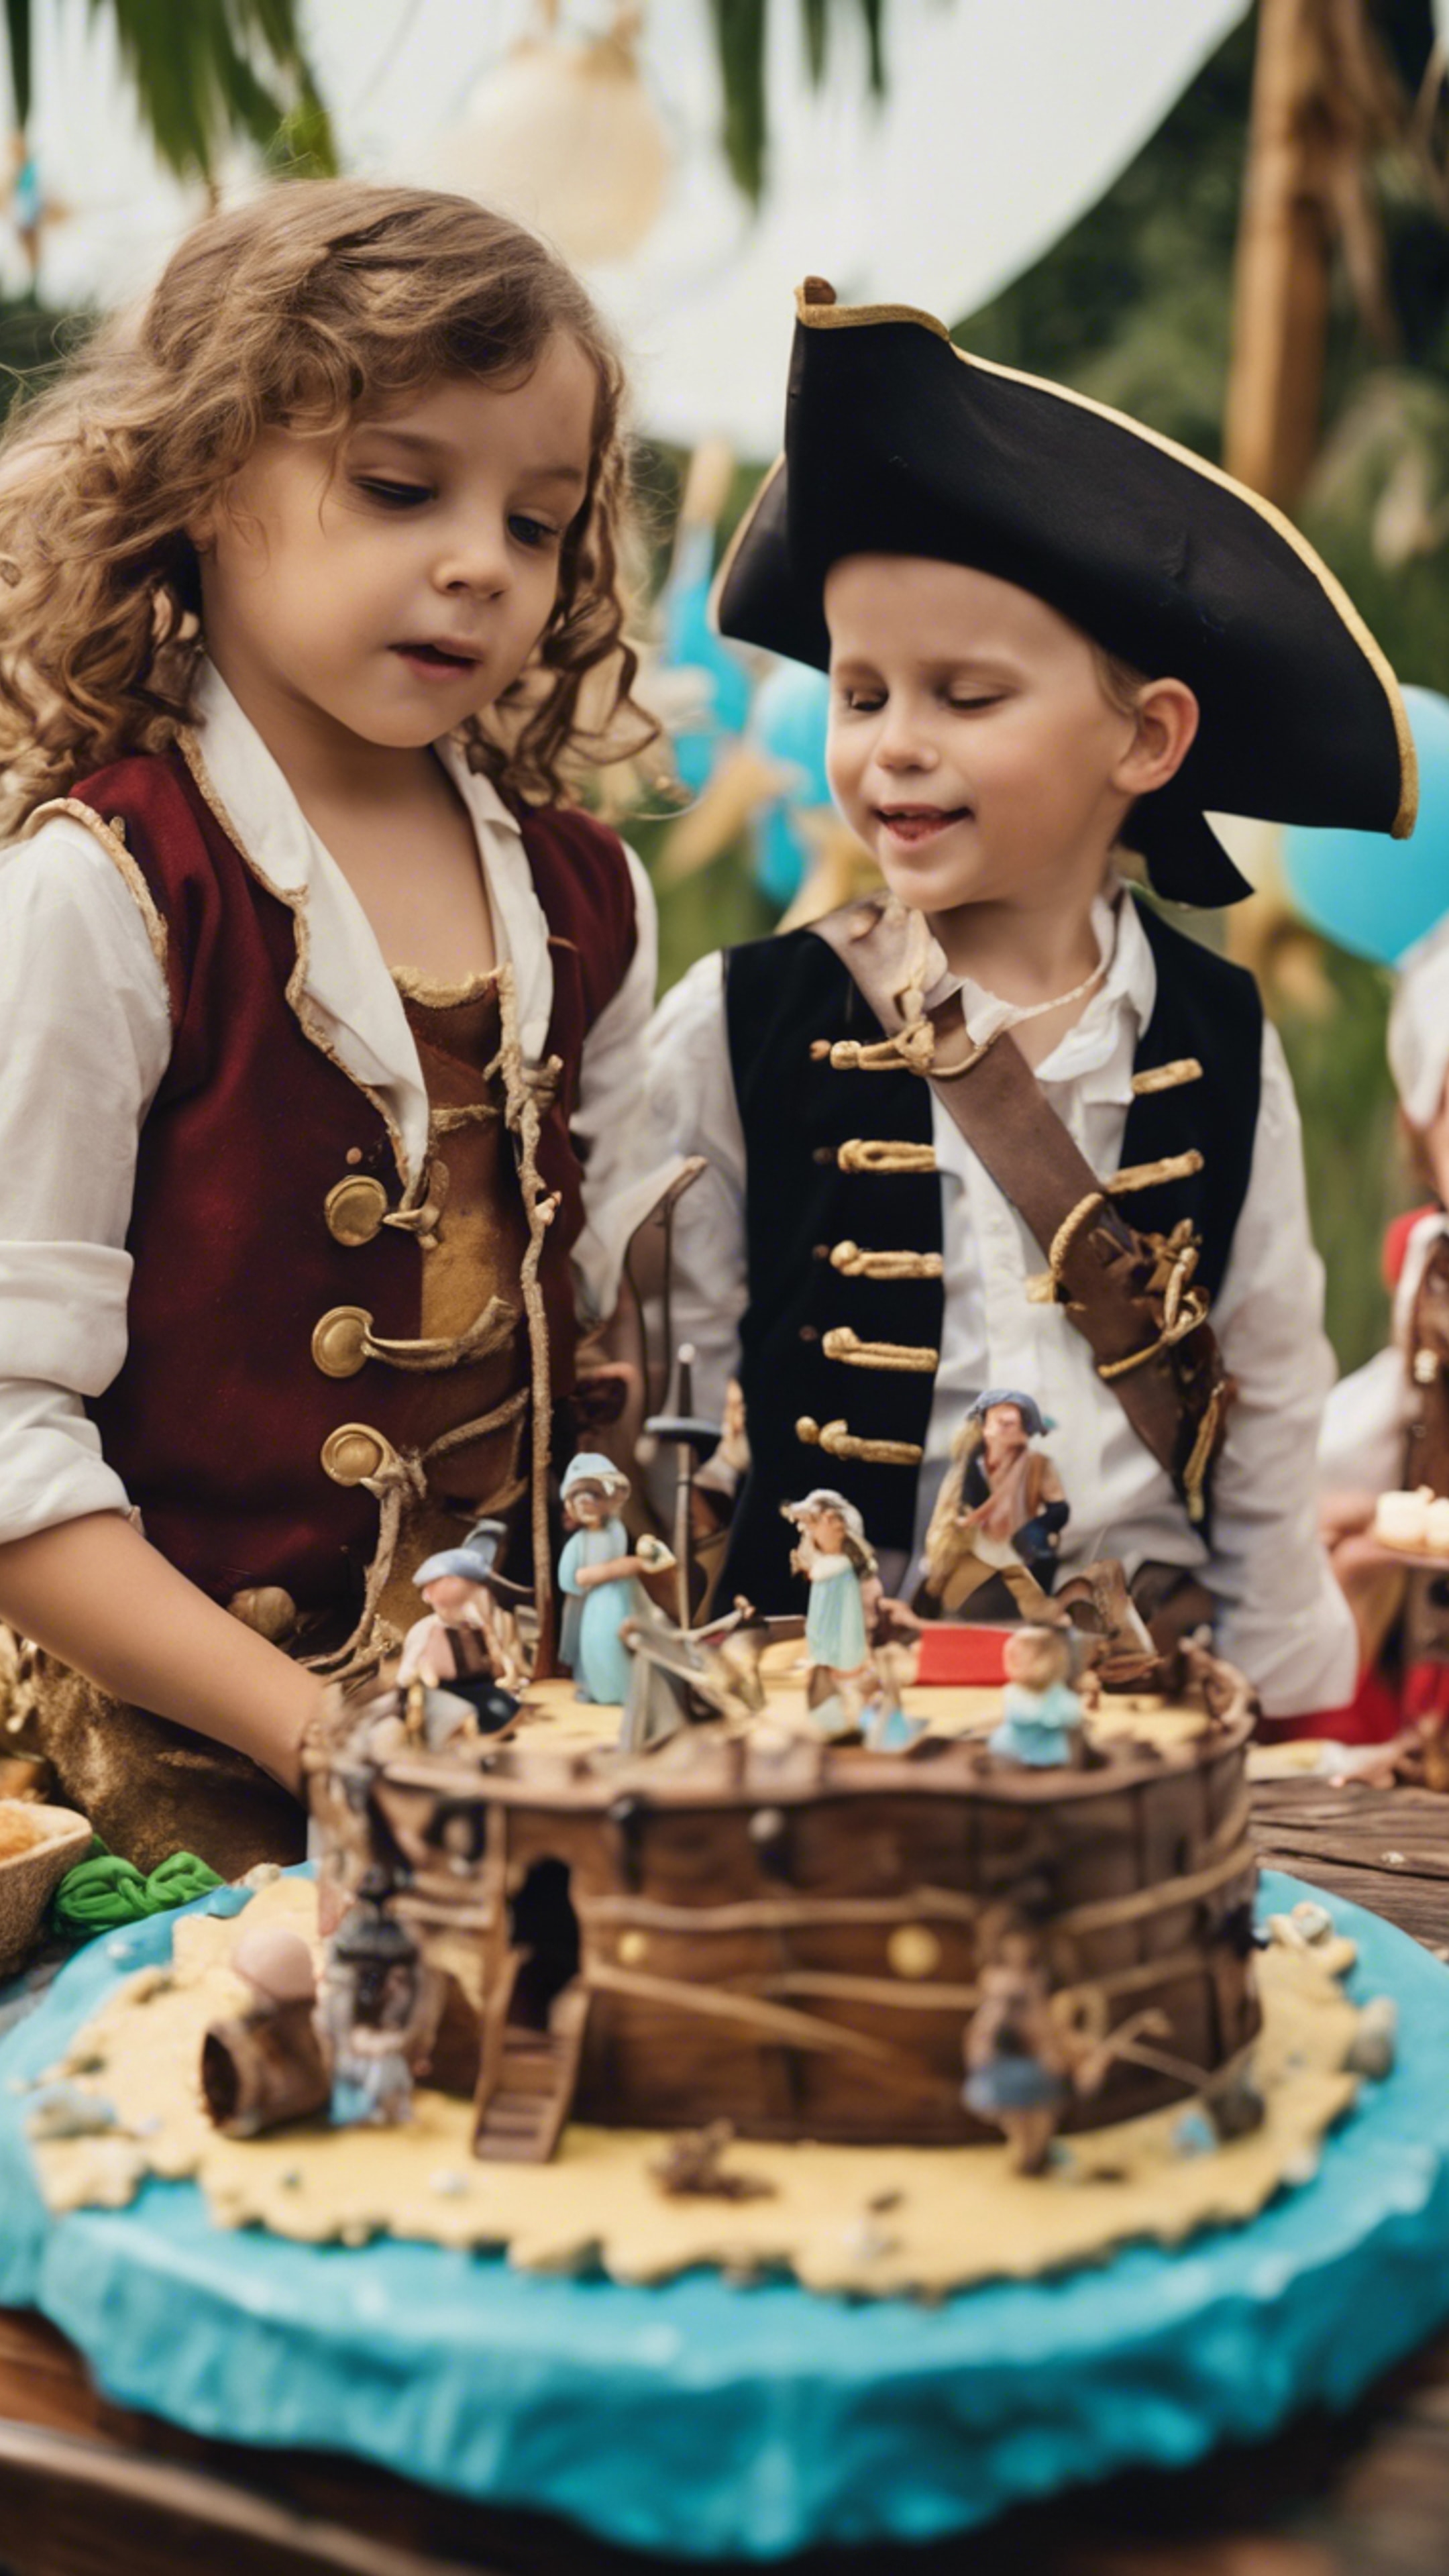 Children's pirate-themed birthday party with a treasure map, pirate ship cake and kids dressed as pirates. Wallpaper[fc1a6e05b86643309d7a]